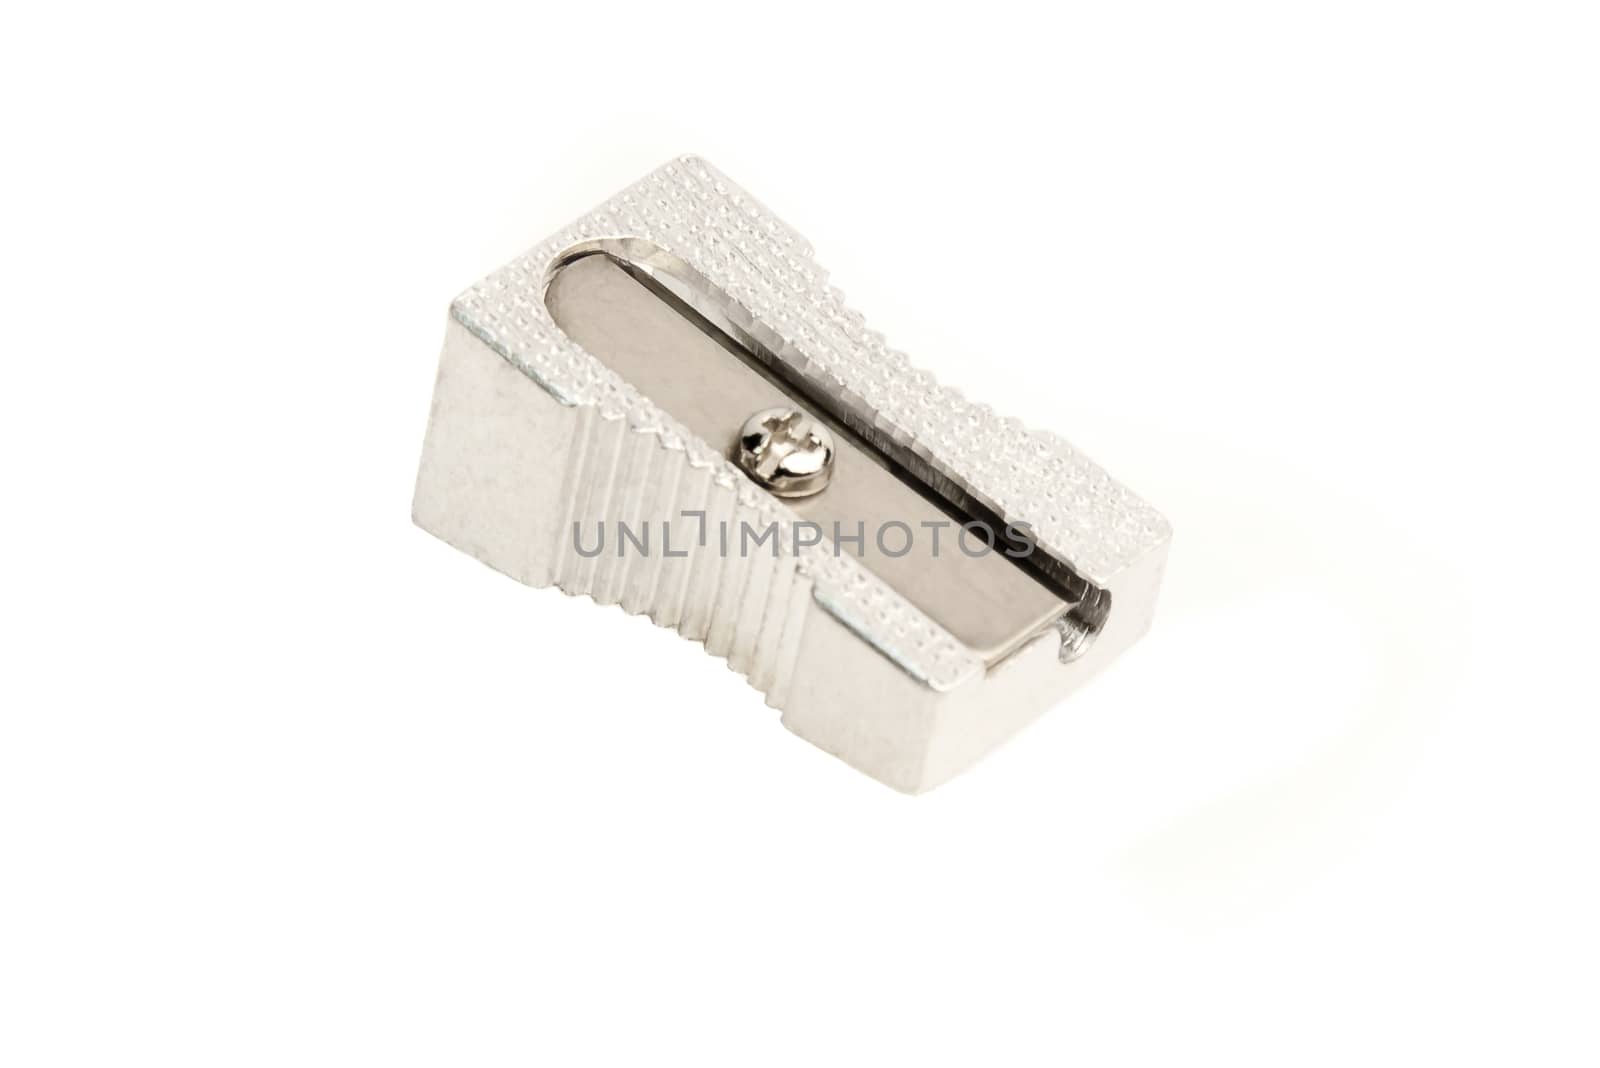 sharpener on white background by donfiore